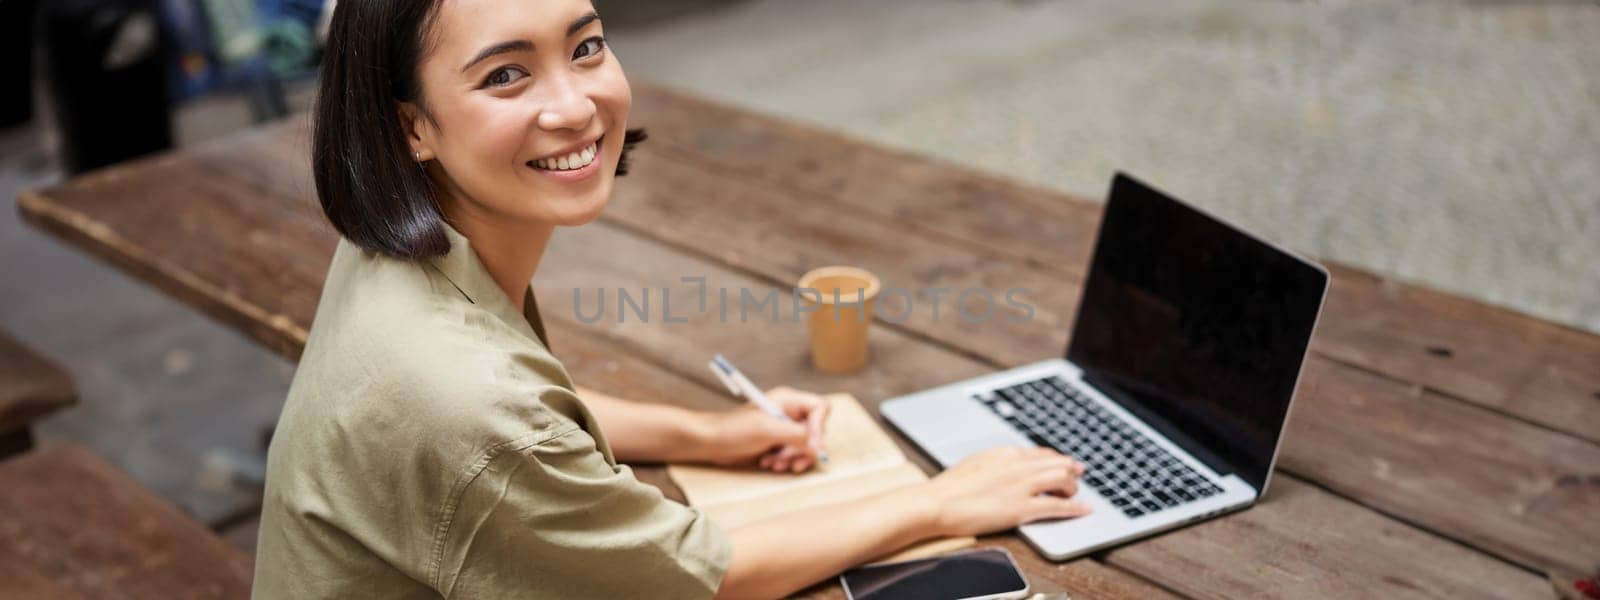 Portrait of young asian woman working on laptop, screen is blank. Girl working outdoors on remote, studying, e-learning and smiling.